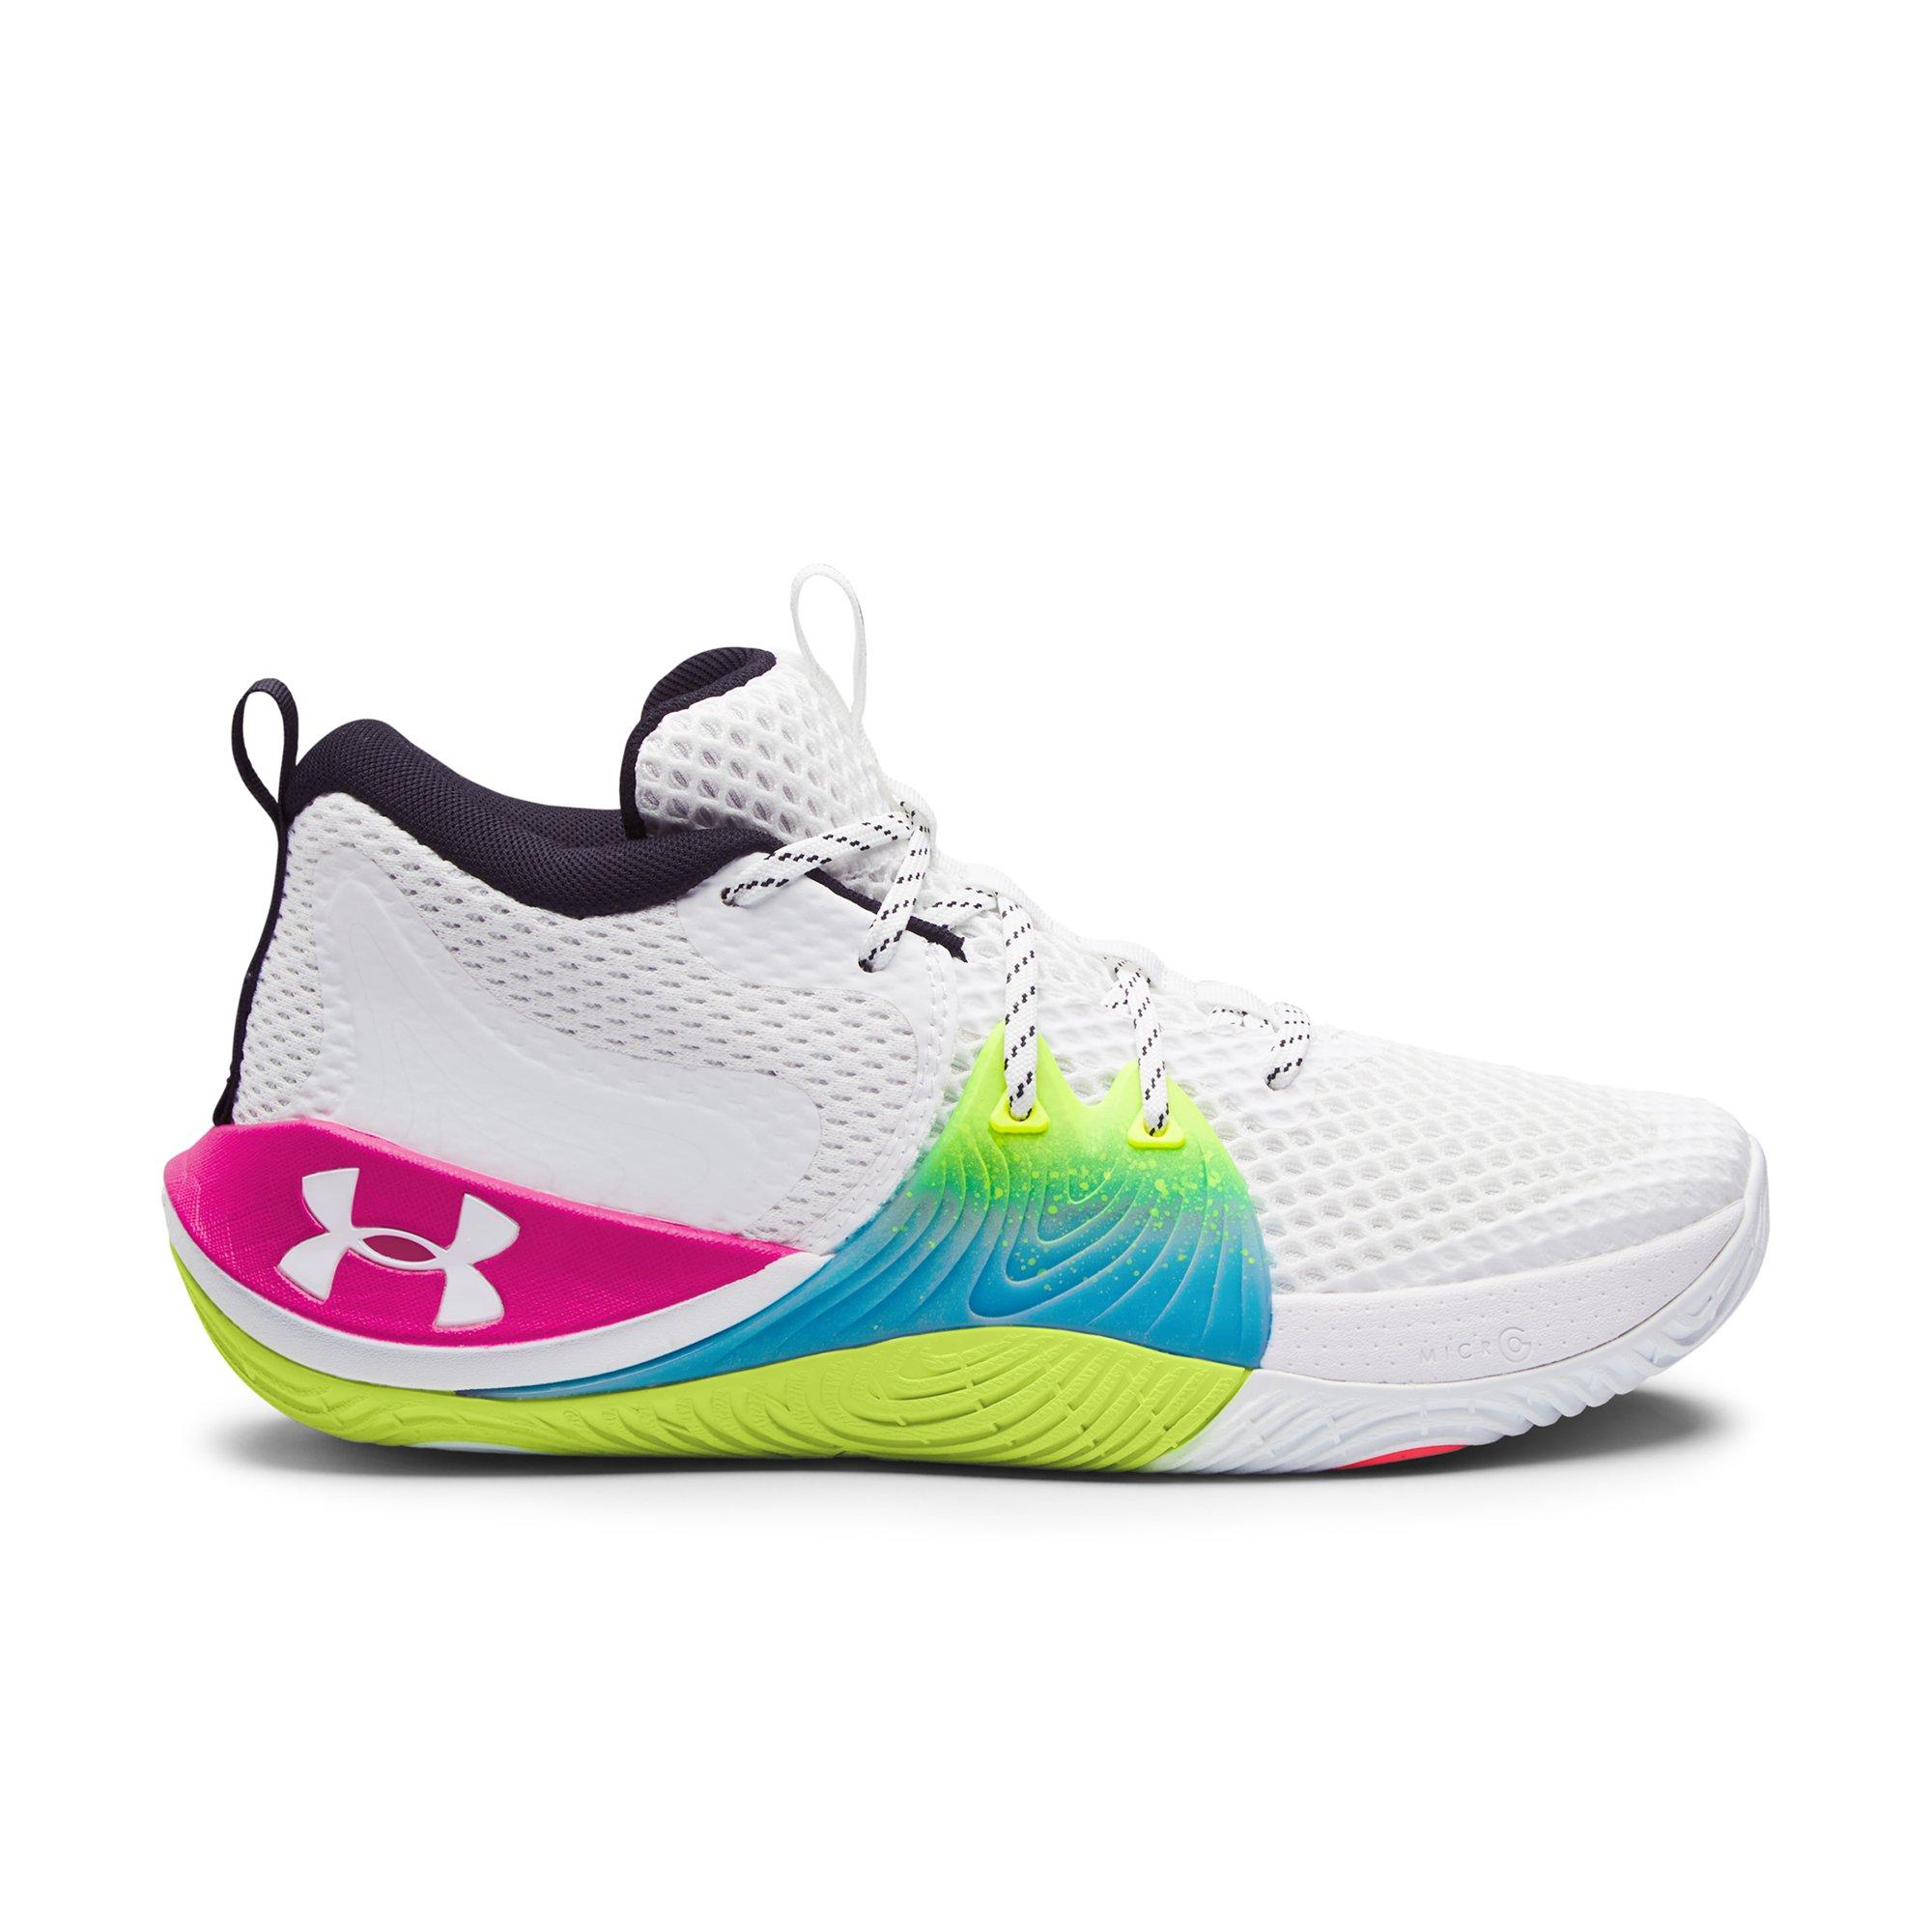 Sneakers Release – Under Armour Embiid 1 “Draft Night”  Men’s and Kids’ Basketball Shoe